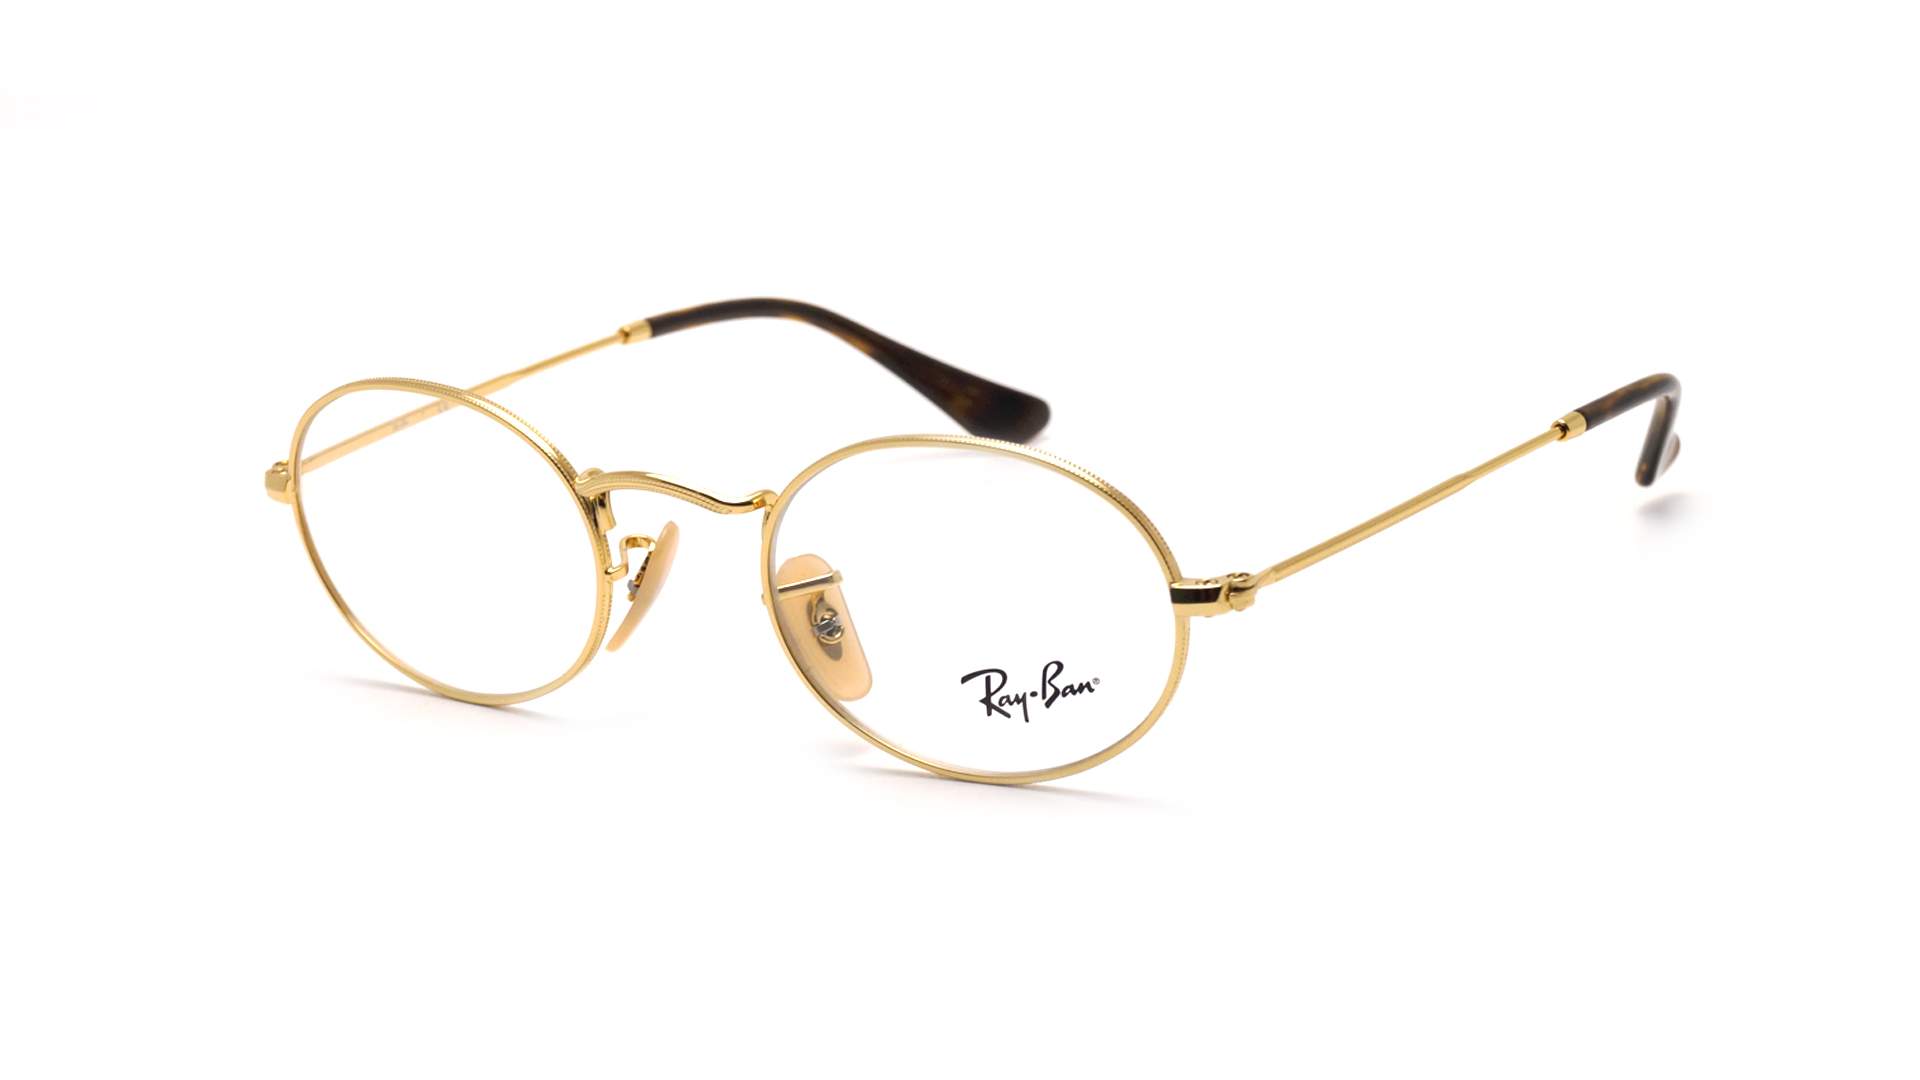 Eyeglasses Ray Ban Oval Gold Rx3547 Rb3547v 2500 48 21 Small In Stock Price 6658 € Visiofactory 